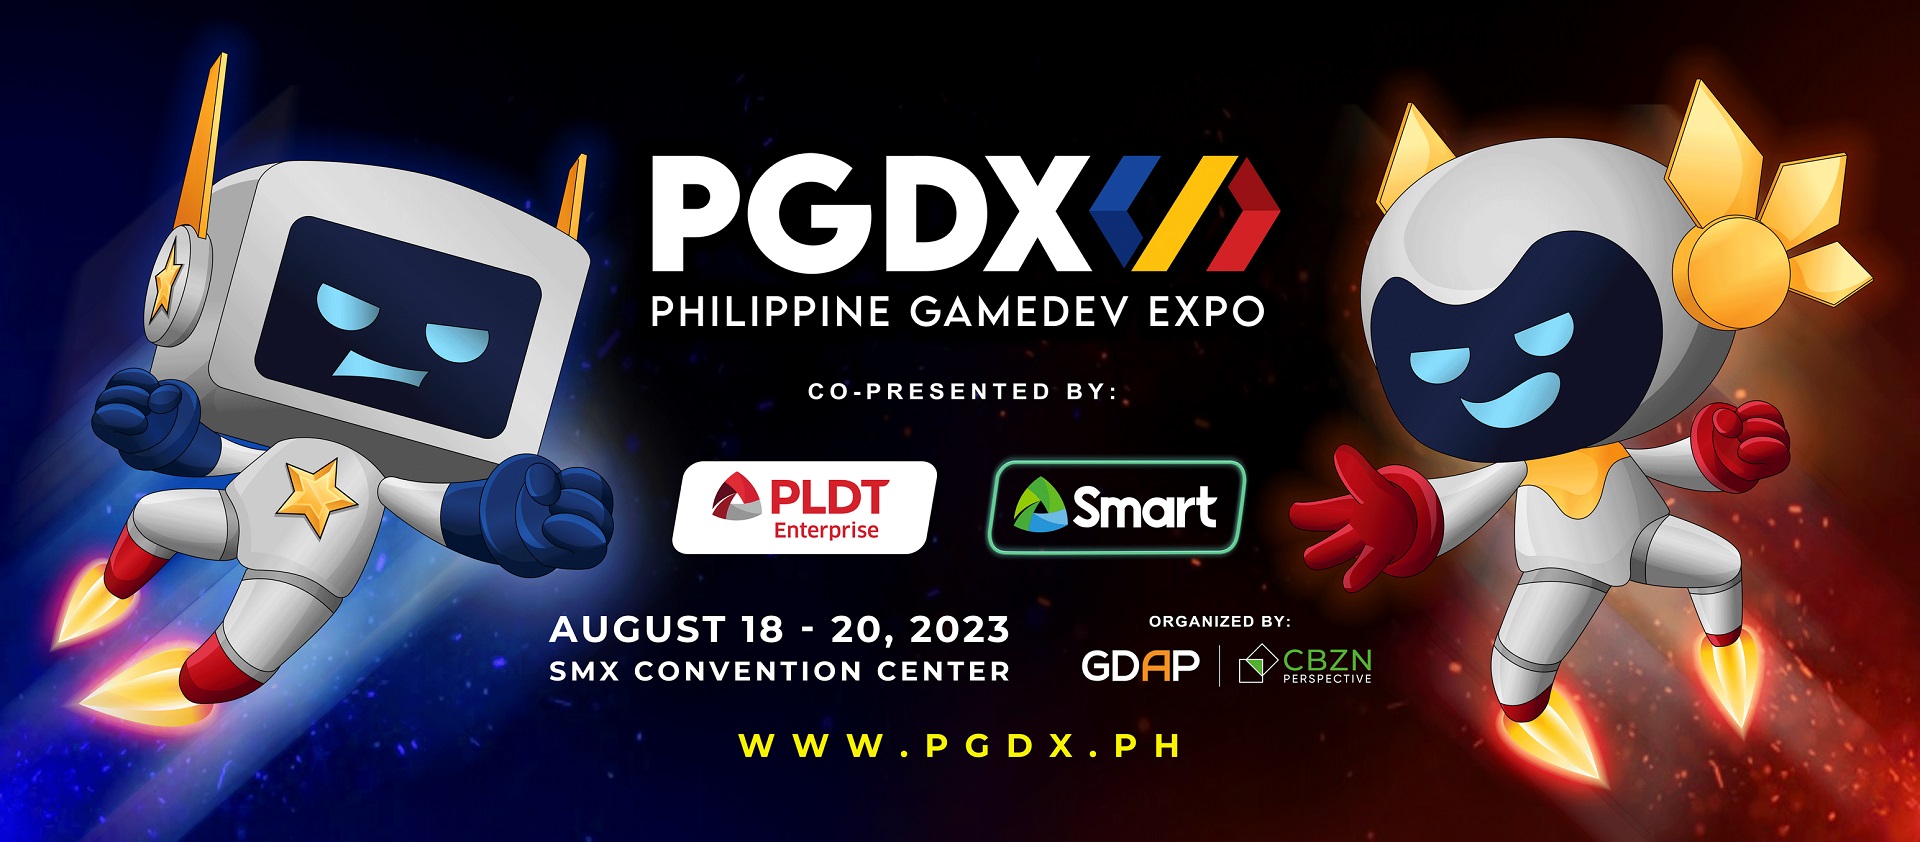 Philippine Game Dev Expo (PGDX) 2023 List of Indie Games, Activities for Businesses and Visitors